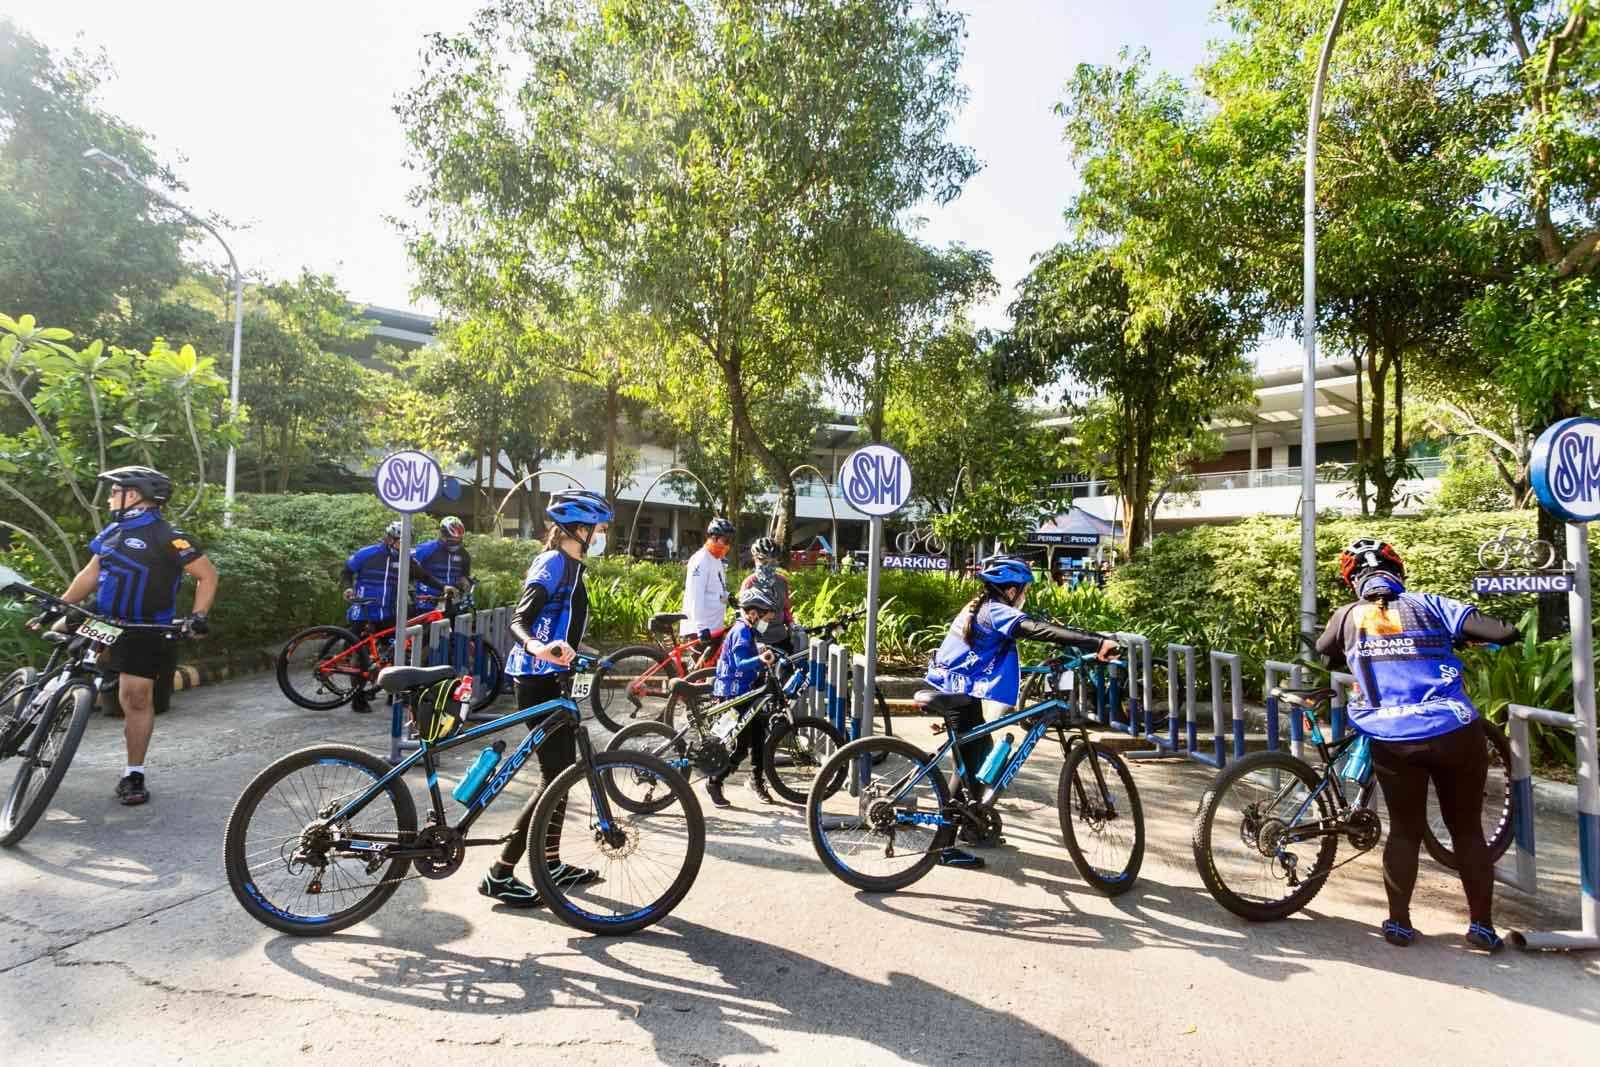 SM City Iloilo has heeded the call of Ilonggo cyclists for a more bike-friendly facilities by putting up new bike racks with a bike repair station in a much better location at Southpoint area.